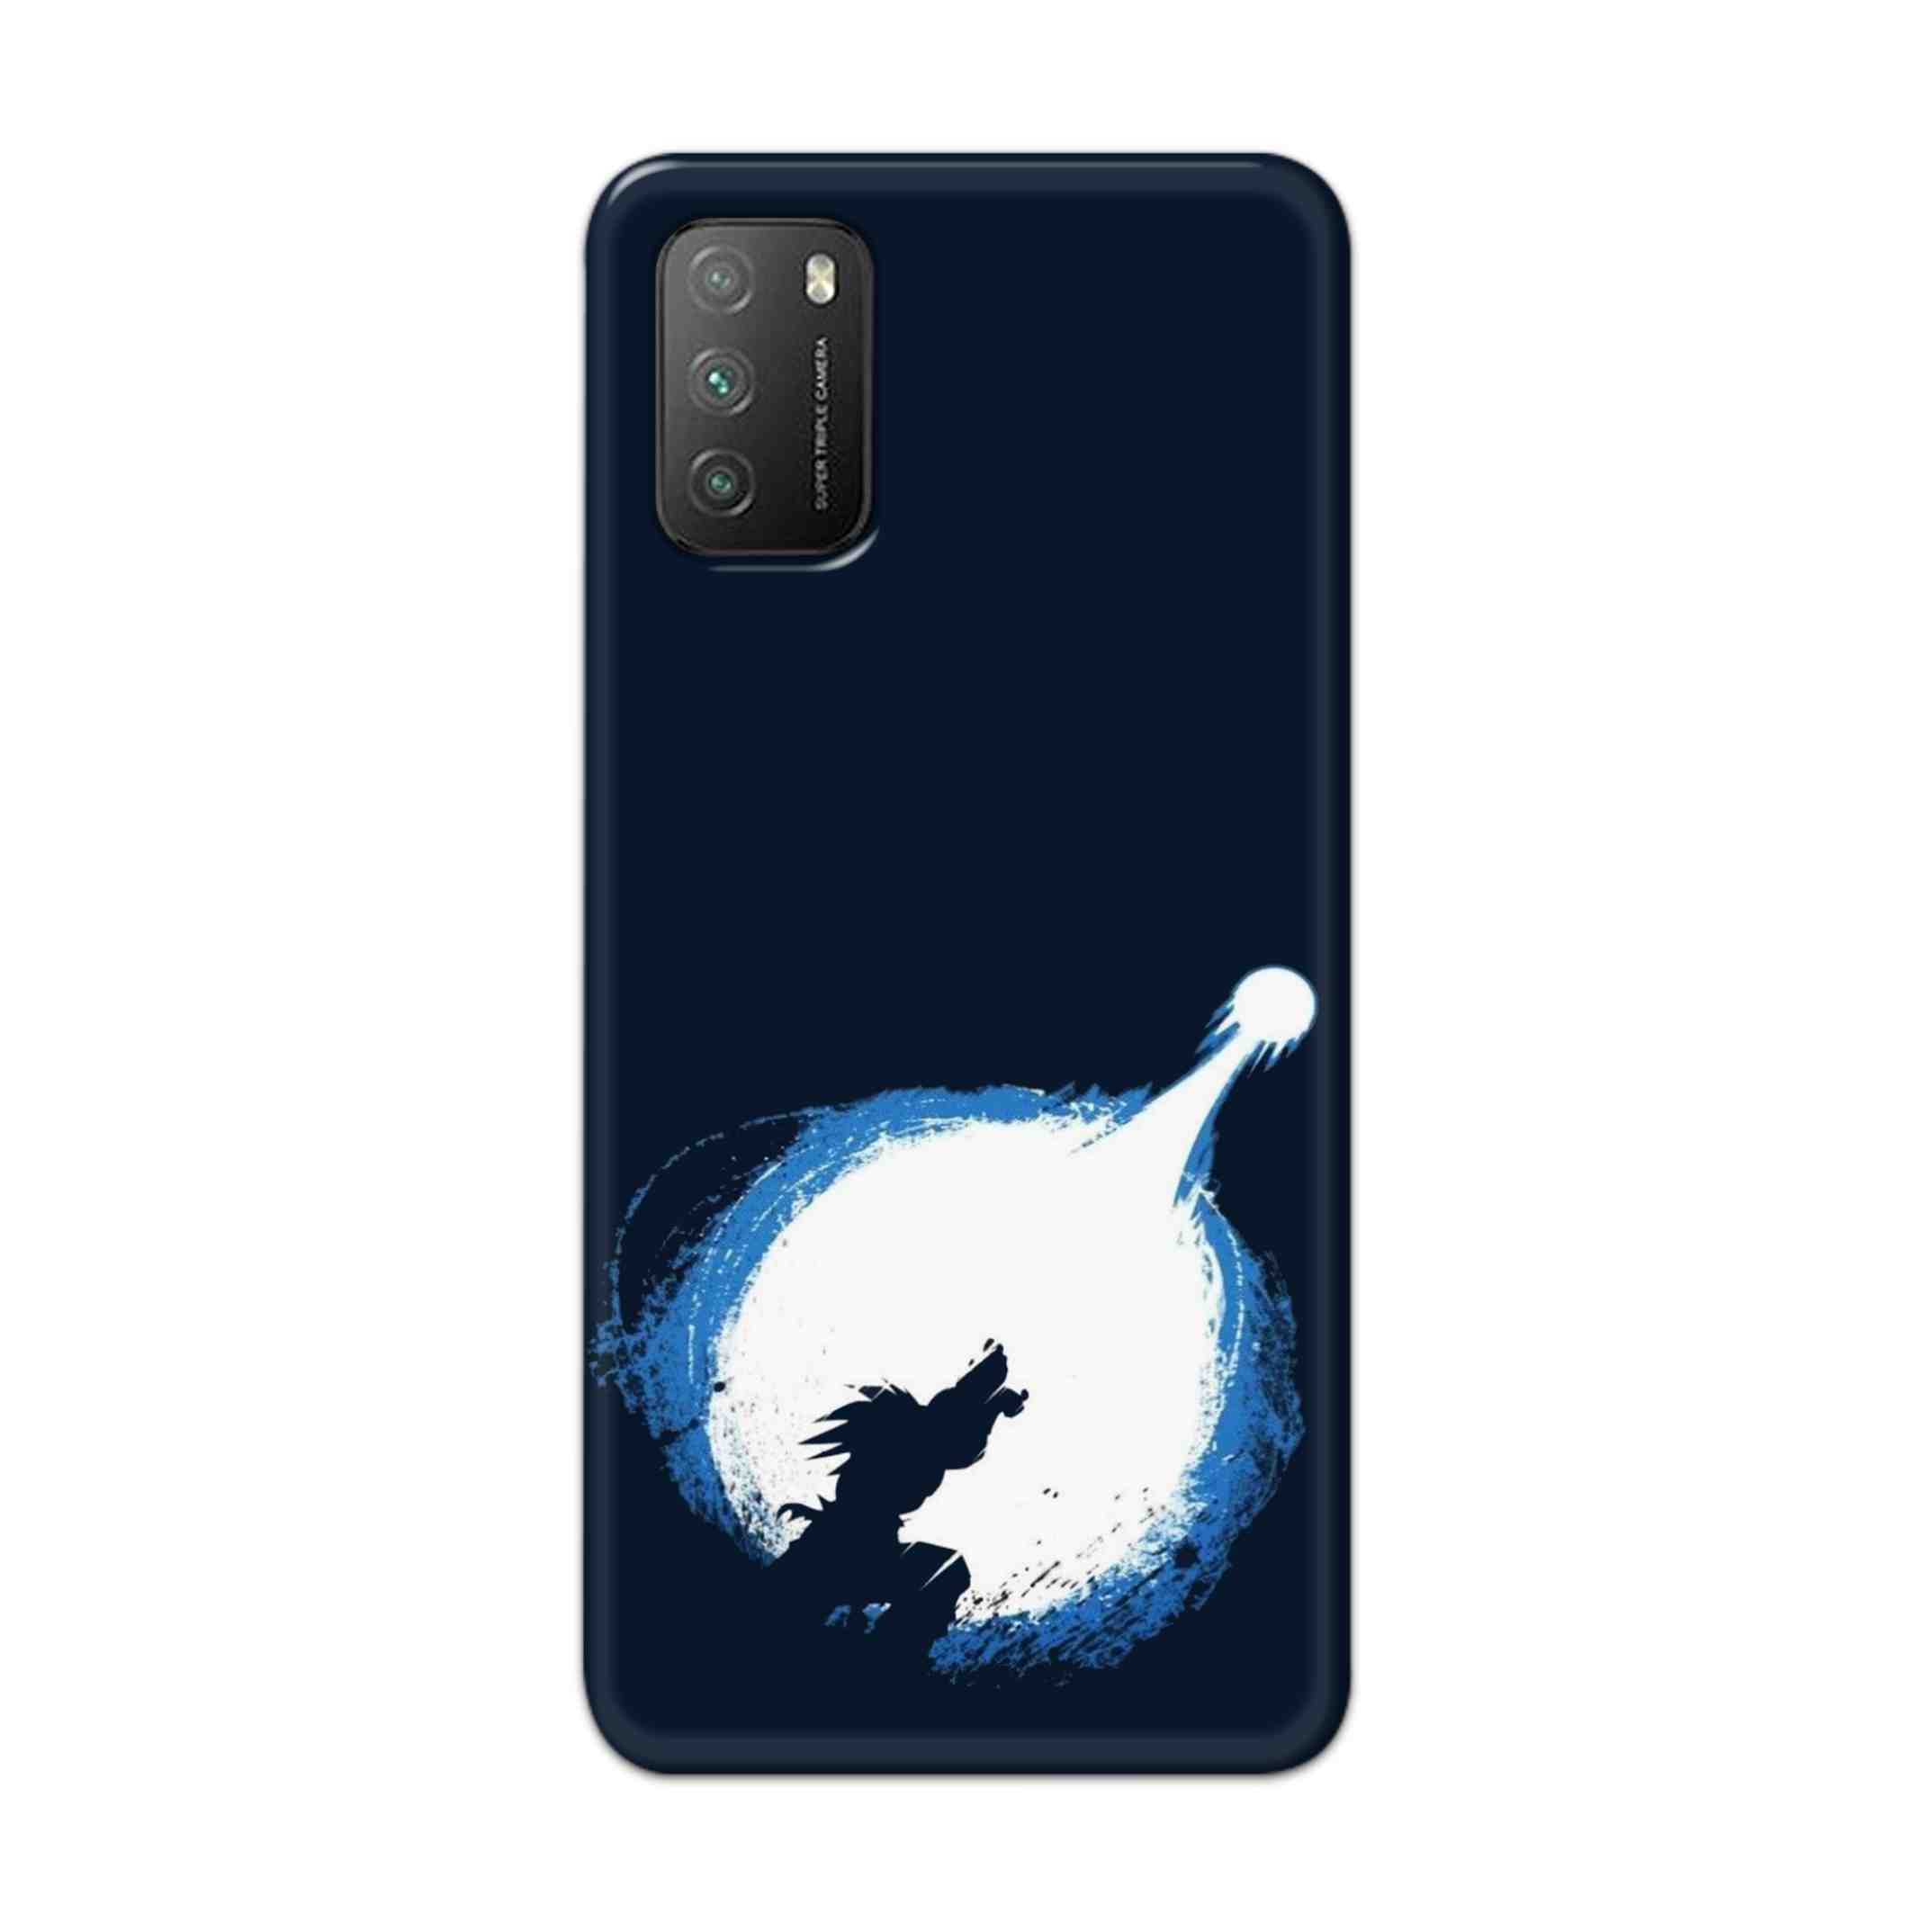 Buy Goku Power Hard Back Mobile Phone Case Cover For Poco M3 Online